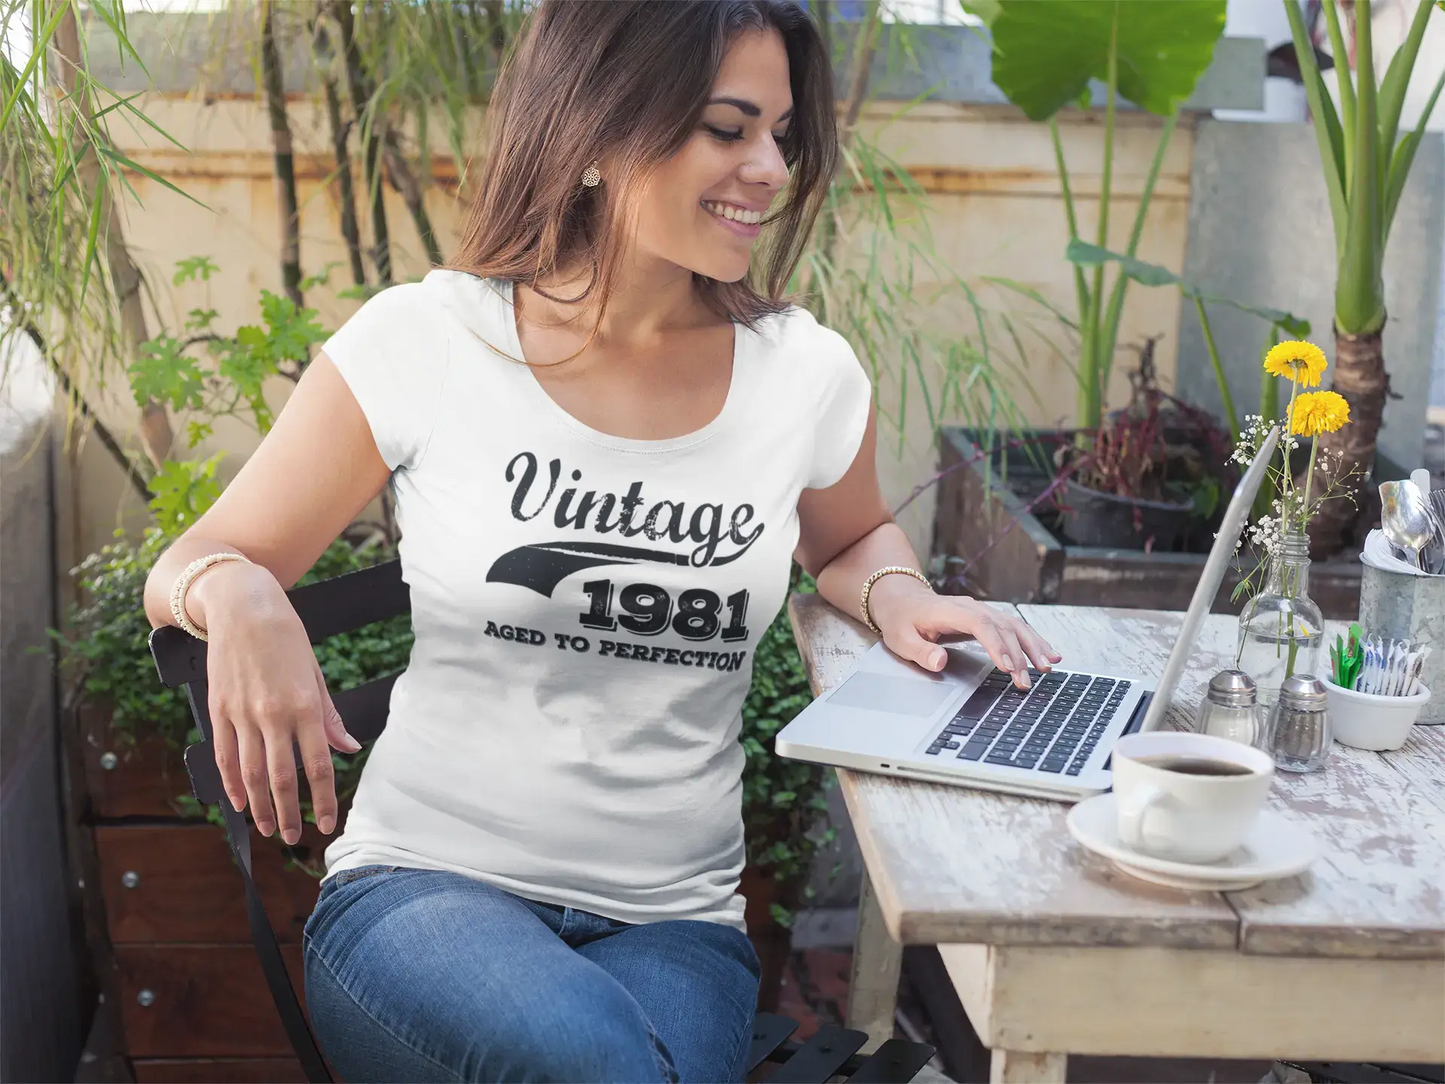 Vintage Aged To Perfection 1981, White, Women's Short Sleeve Round Neck T-shirt, gift t-shirt 00344